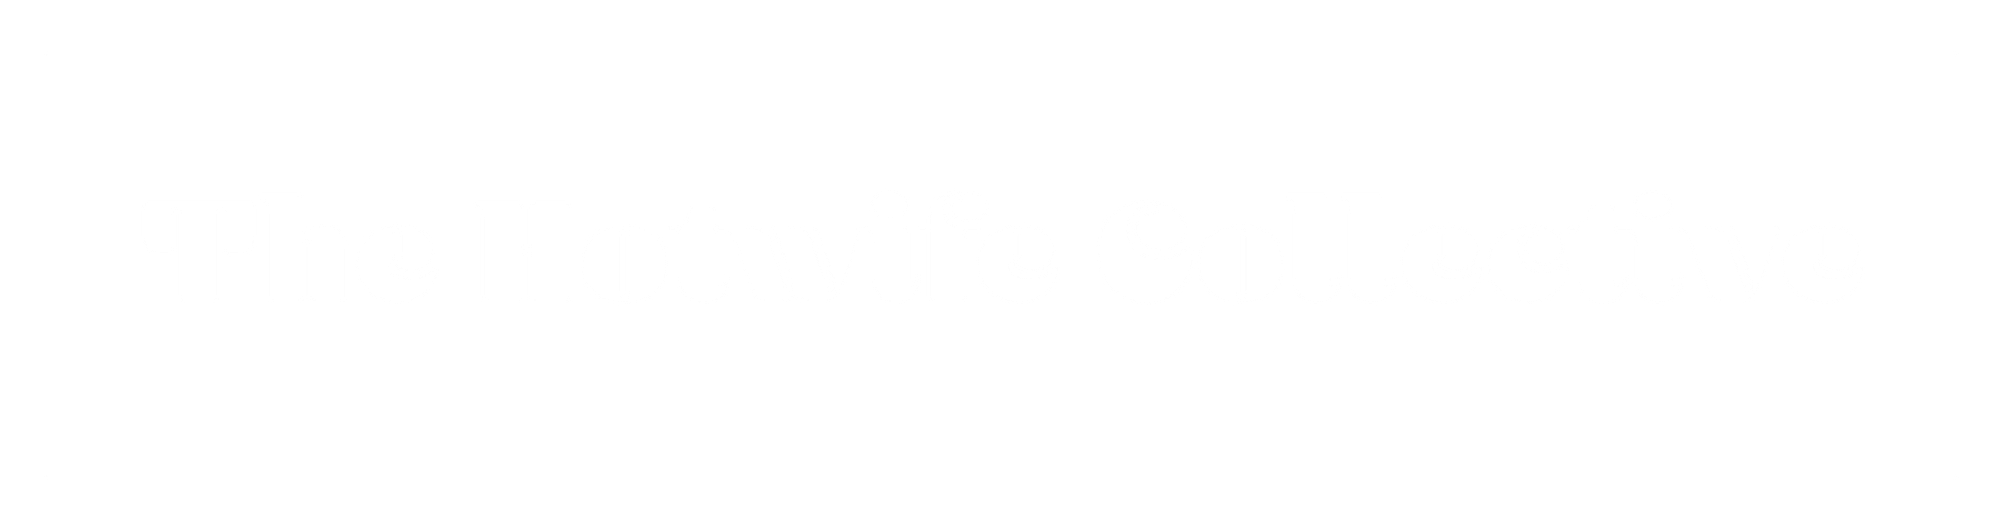 Free Hot Wife Stories